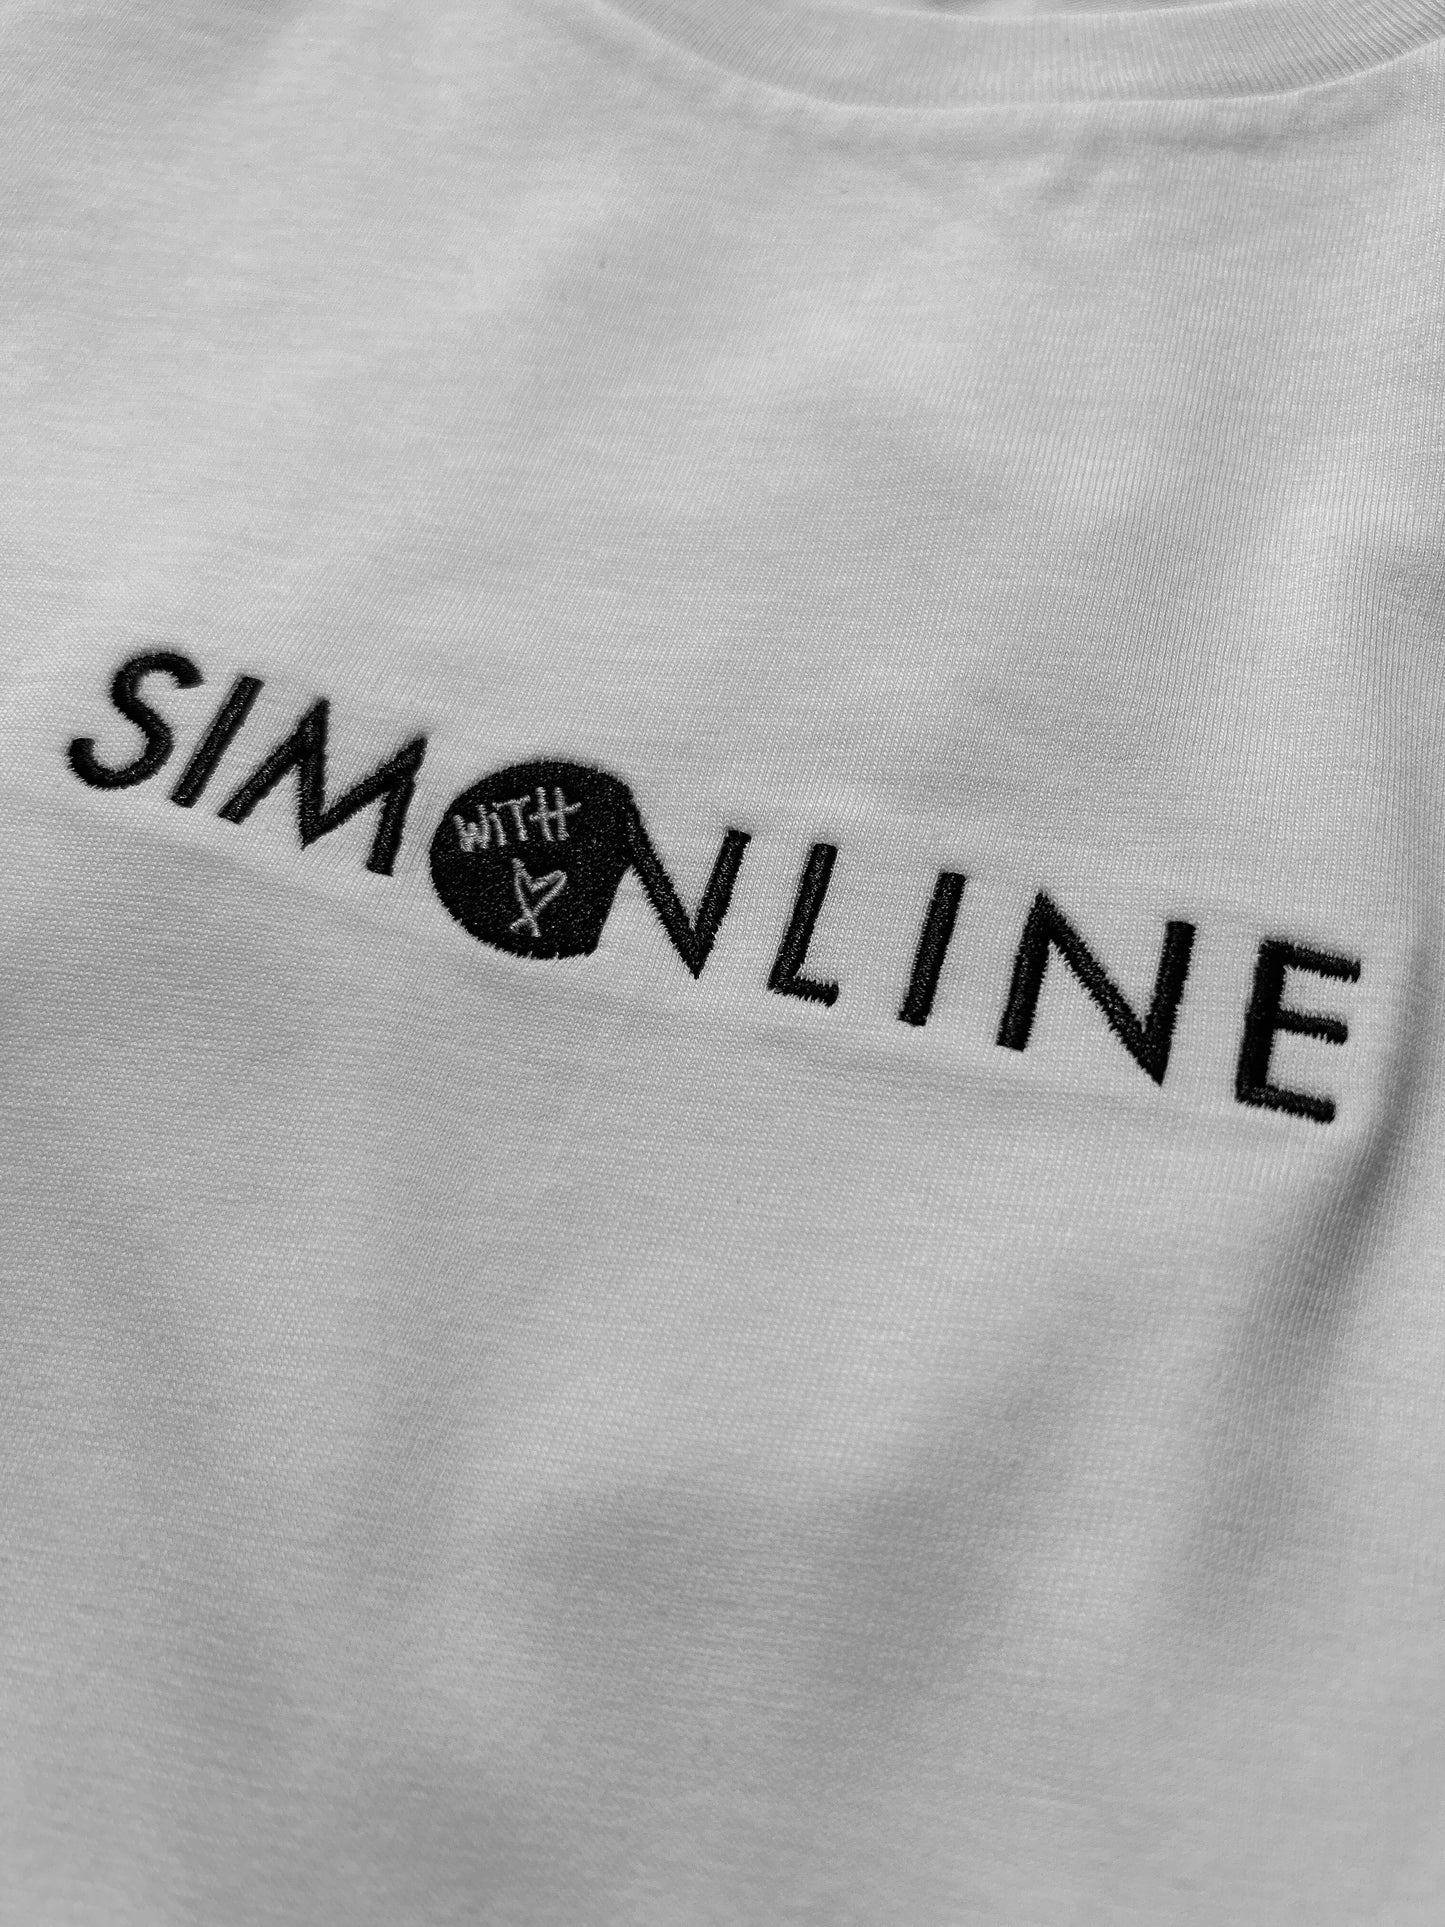 SIMONLINE WITH LOVE T-SHIRT